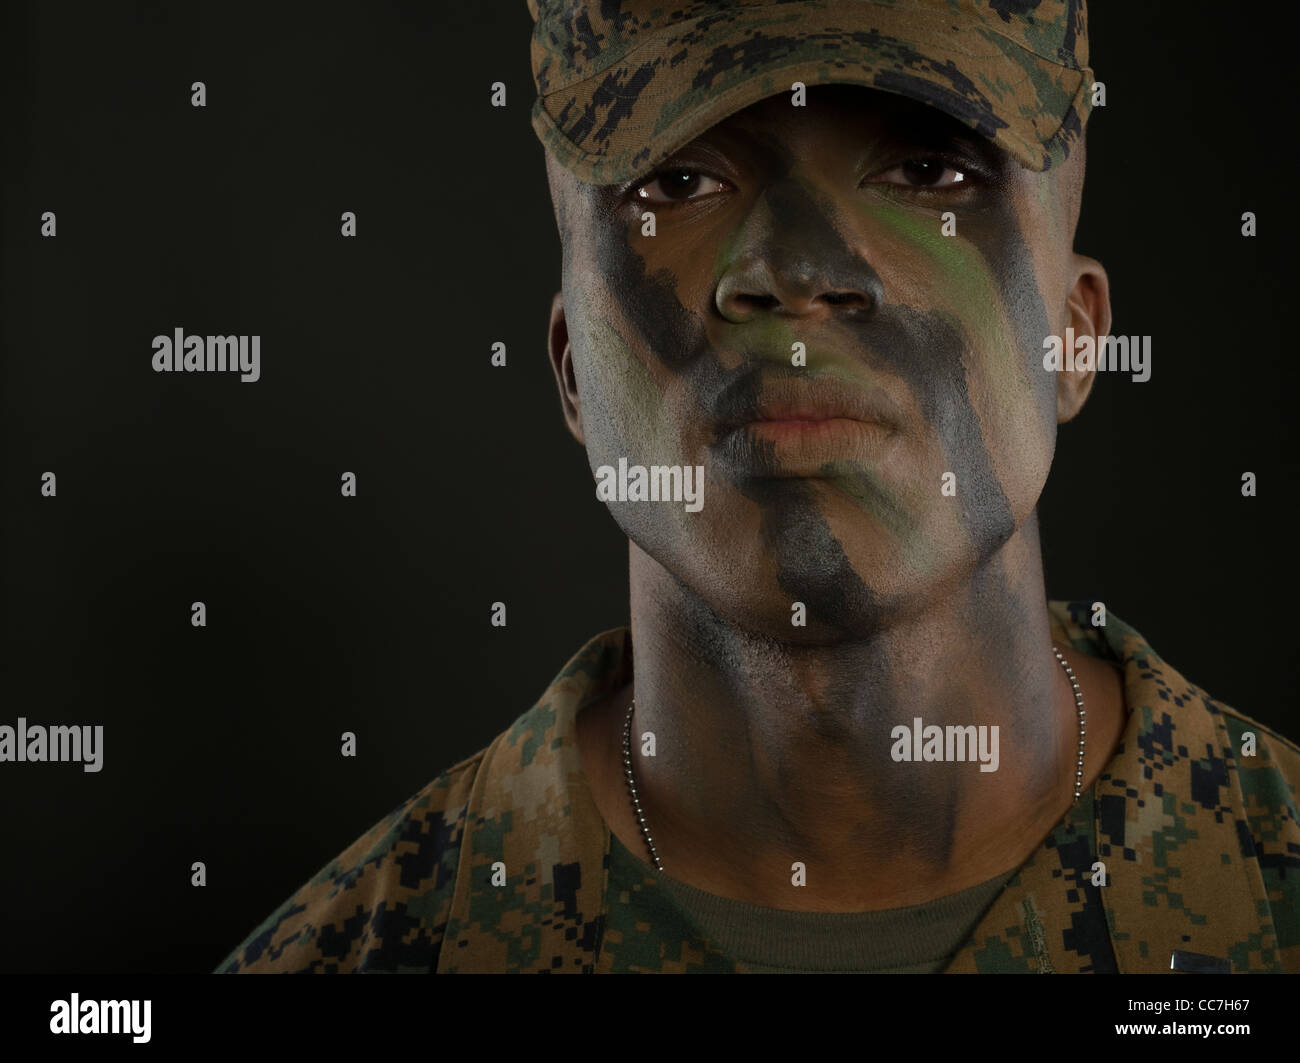 United States Marine Corps Officer in MARPAT digital camouflage uniform and camo  face paint Stock Photo - Alamy